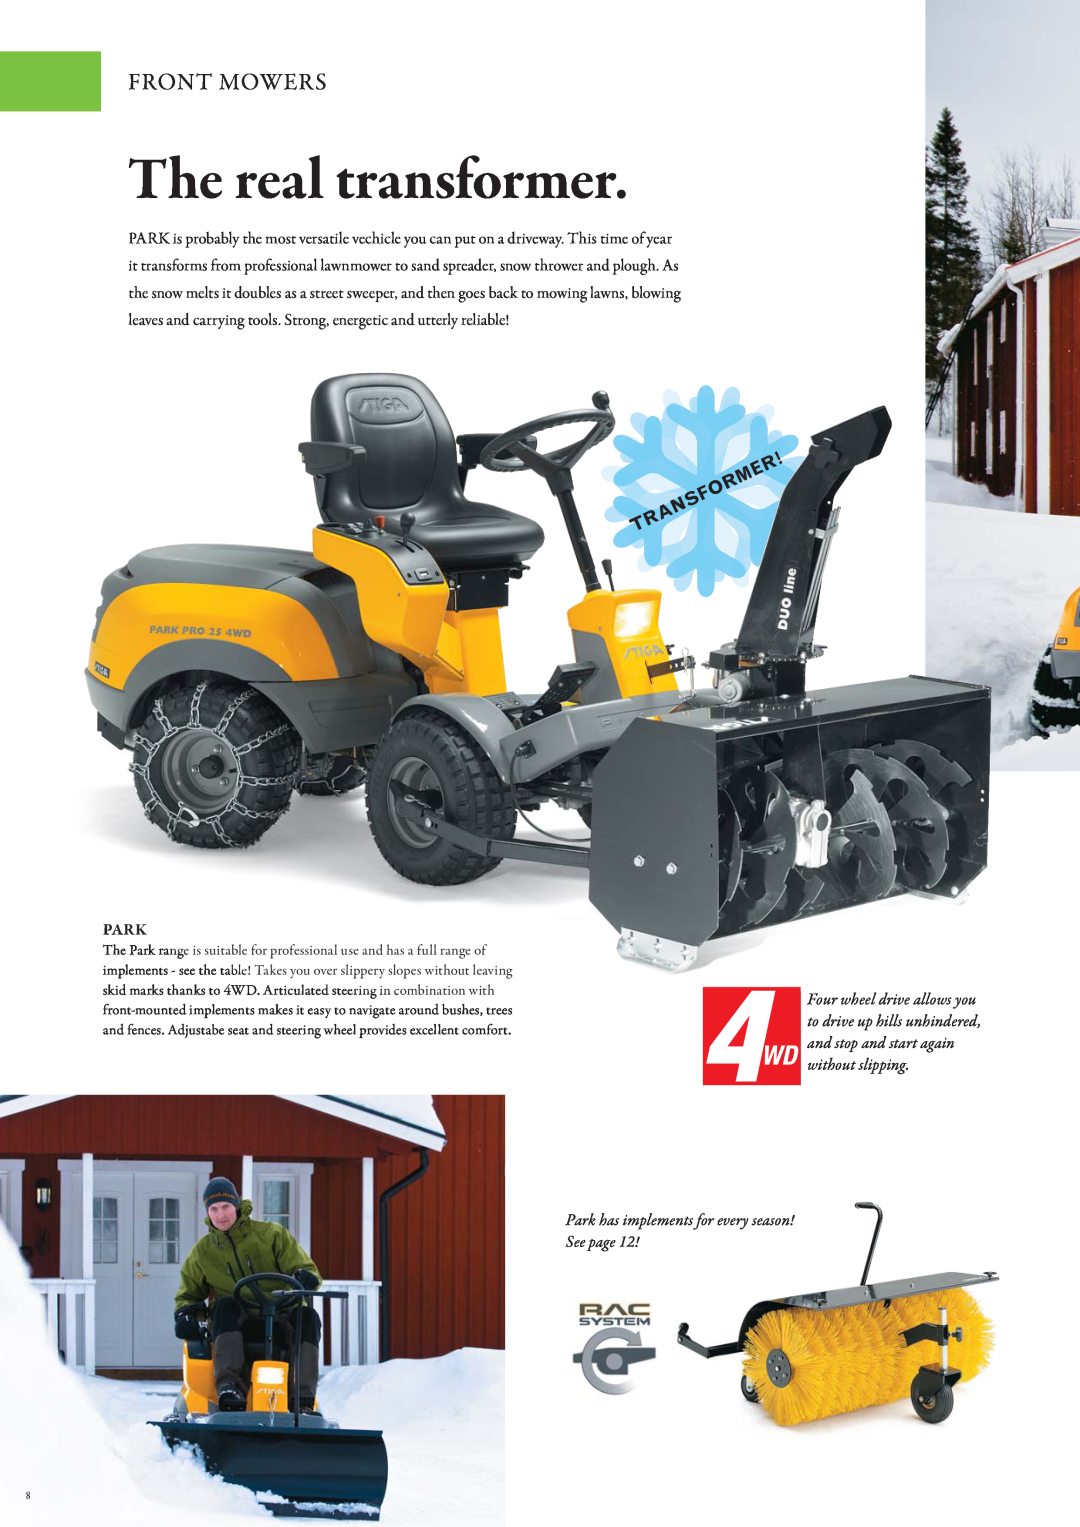 Stiga Snow Throwers manual The real transformer, Front Mowers, Park has implements for every season See page 